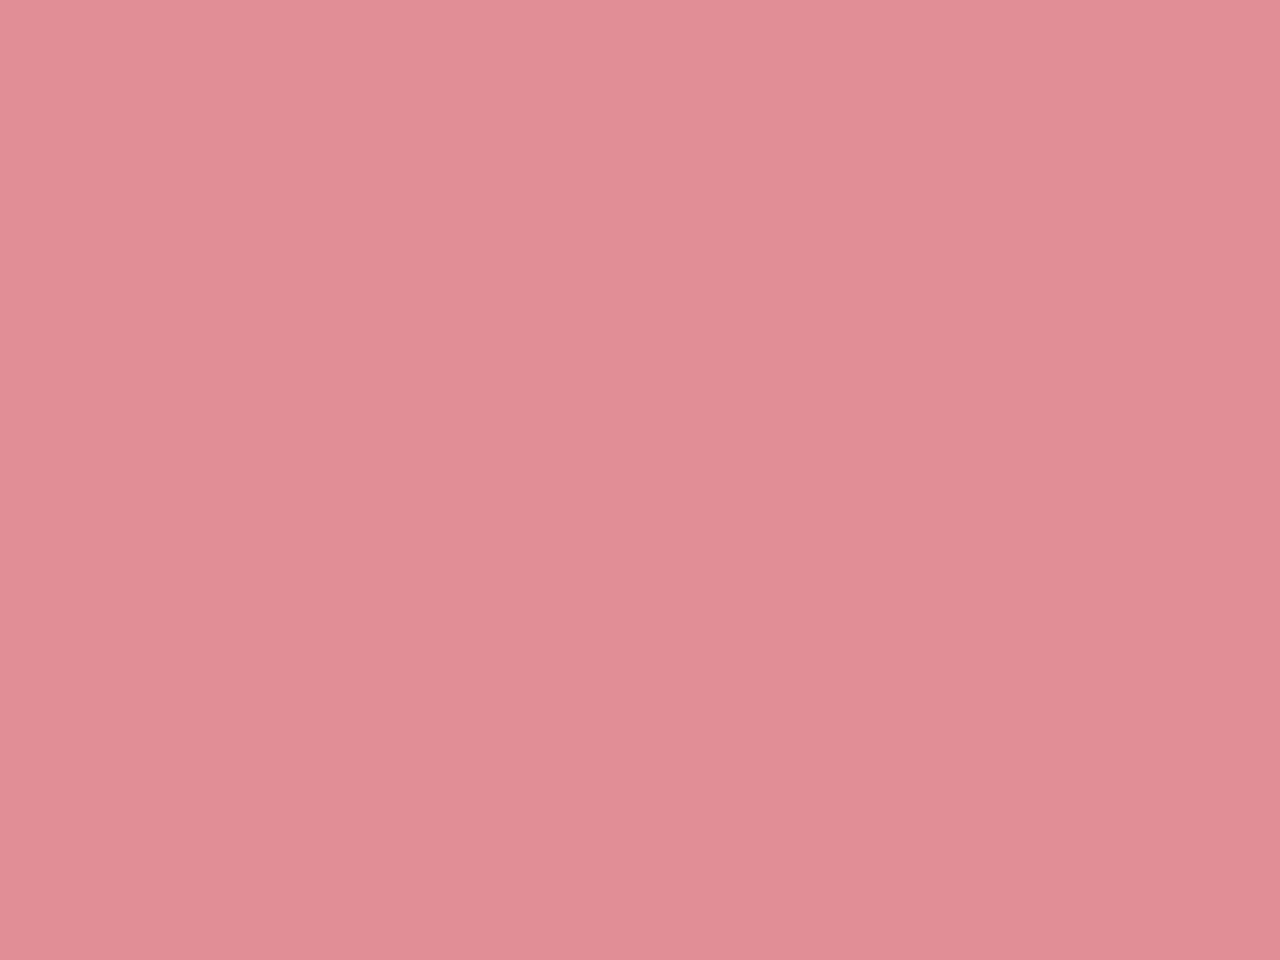 1280x960 Ruddy Pink Solid Color Background